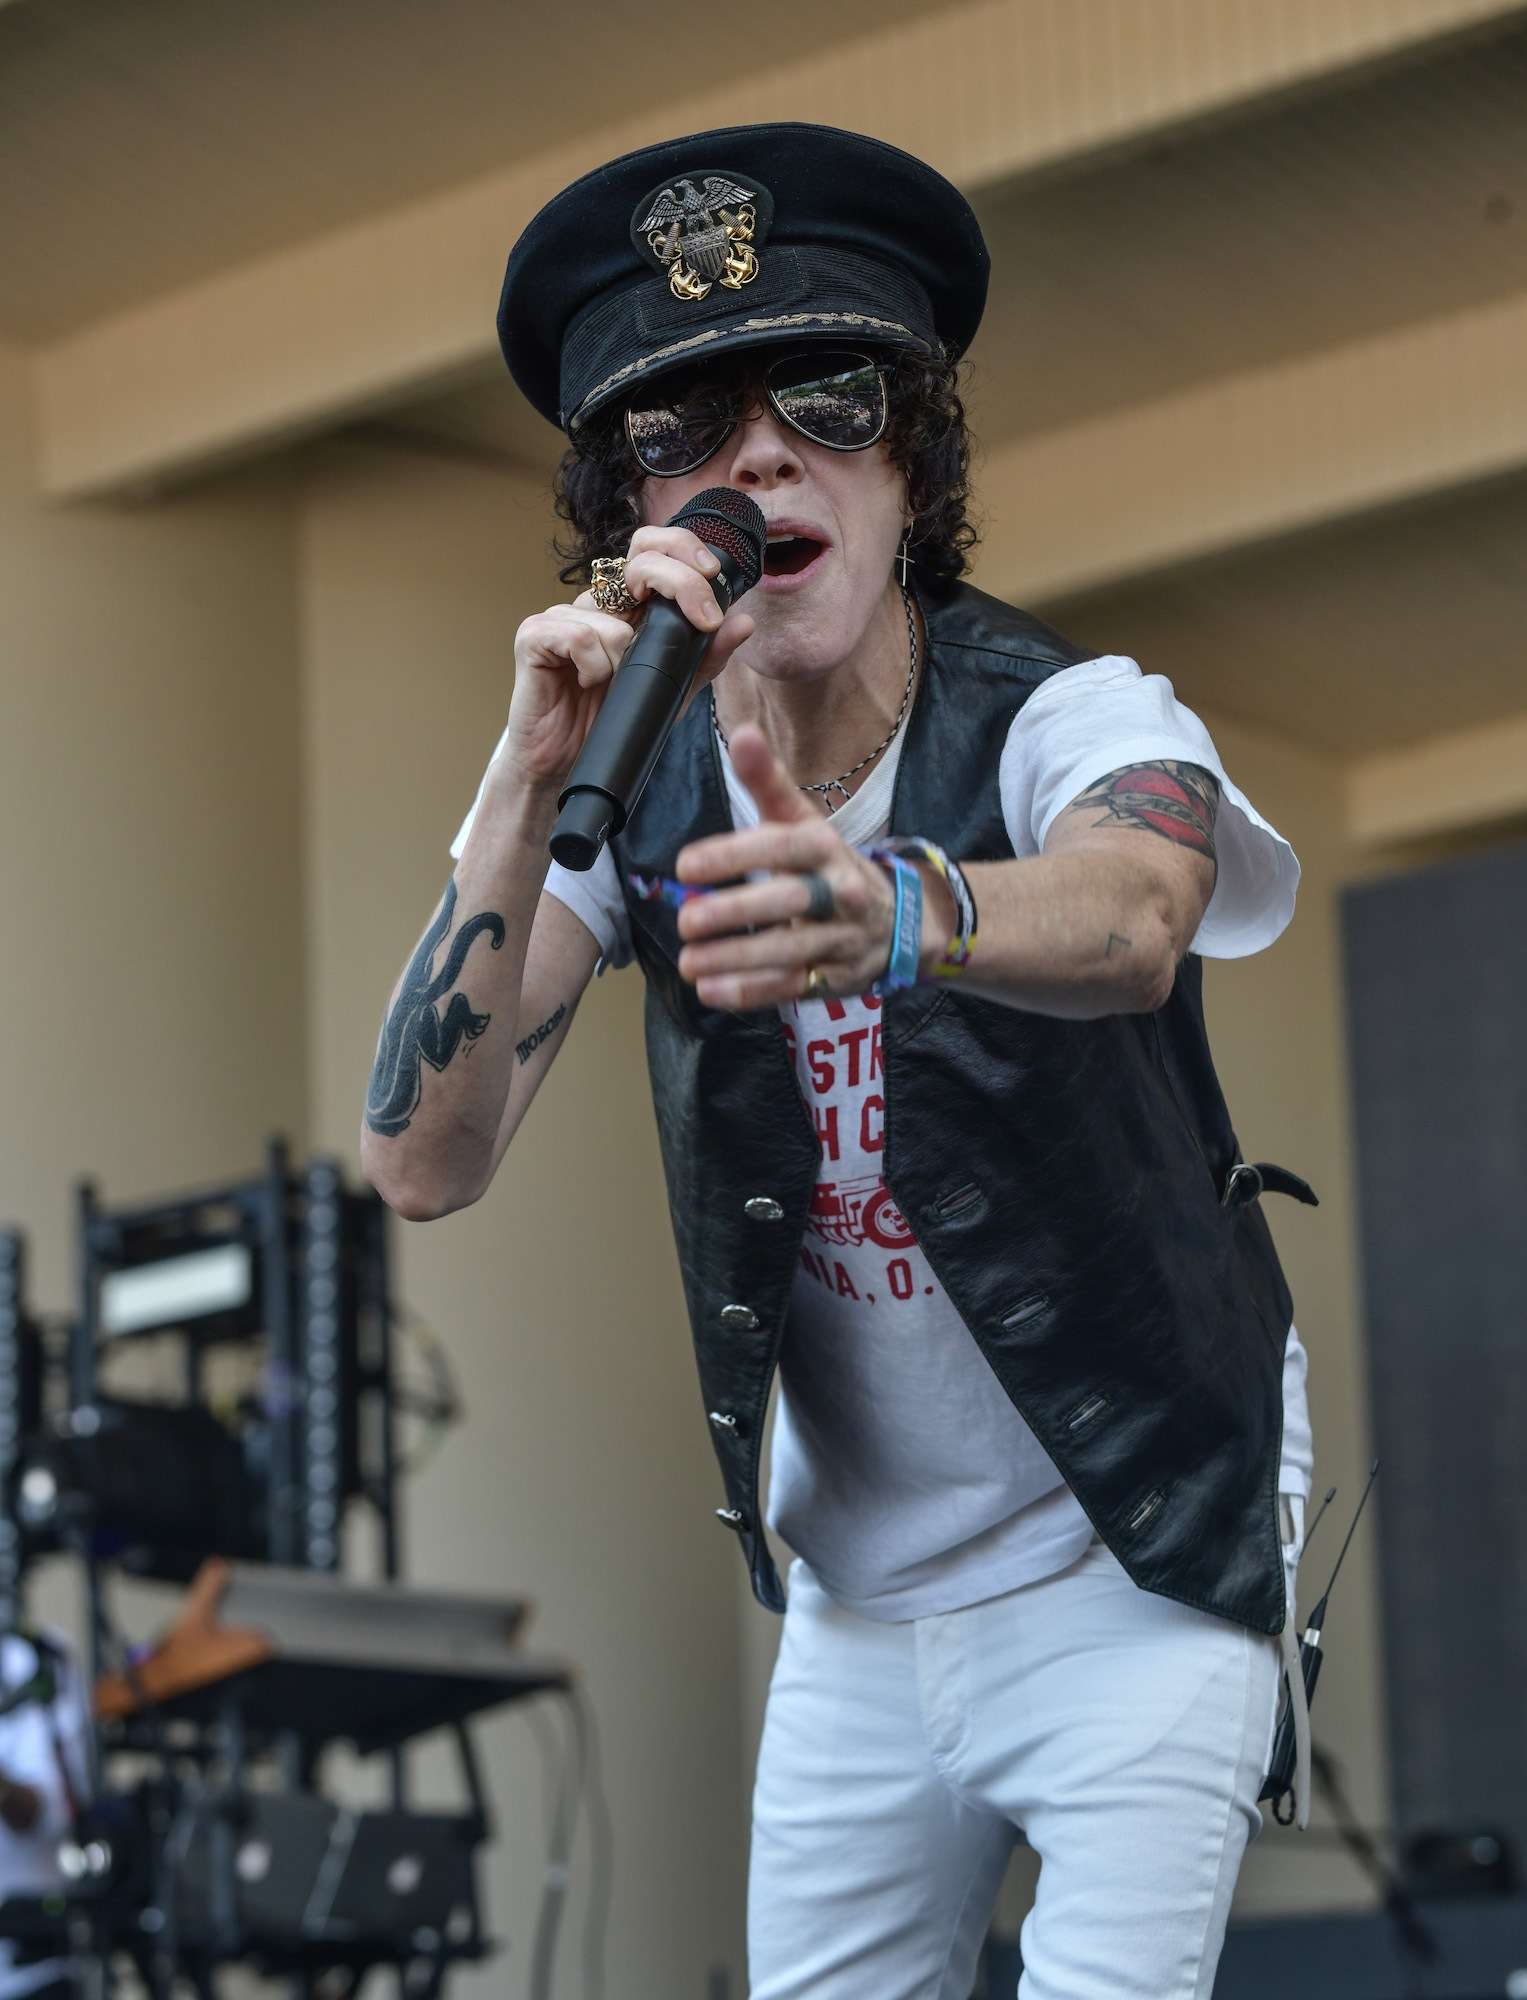 LP Live at Lollapalooza [GALLERY] 12